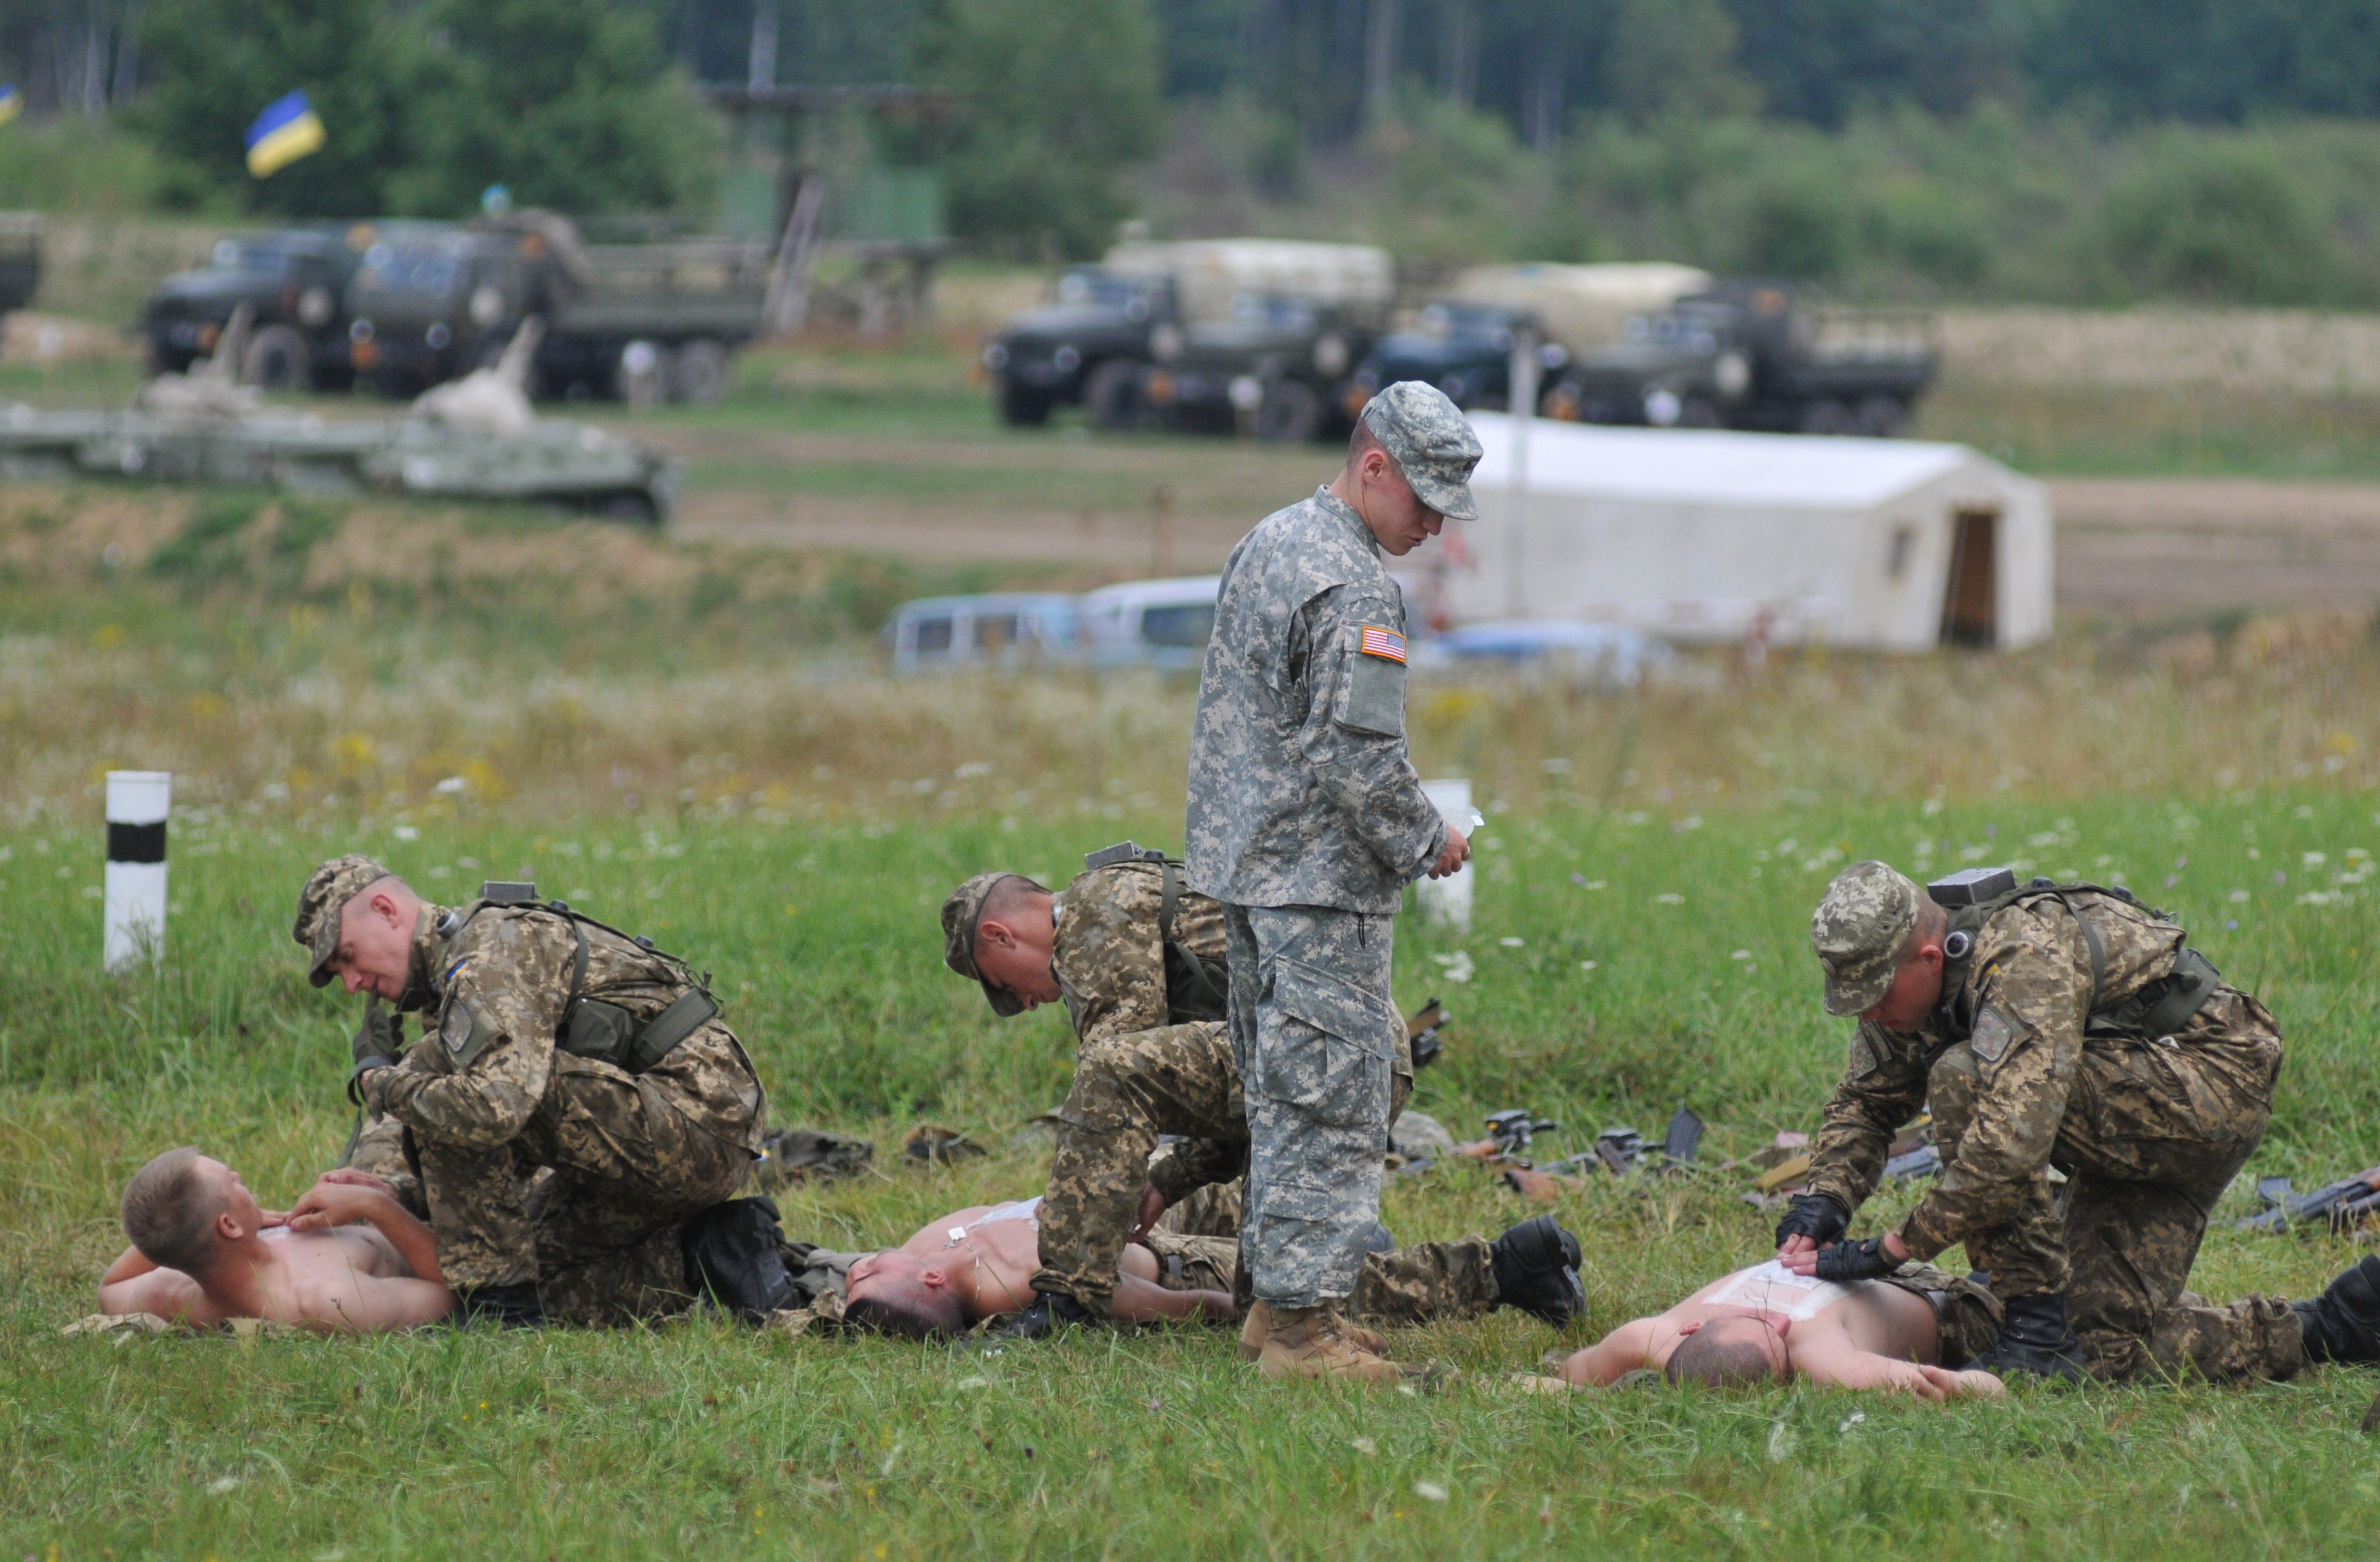 A US serviceman teaches Ukrainian soldiers how to give emergency medical aid during the Rapid Trident/Saber Guardian 2015 military exercises at the International Peacekeeping and Security Centre base outside Lviv, Ukraine on July 24, 2015. (Pavlo Palamarchuk—AP)